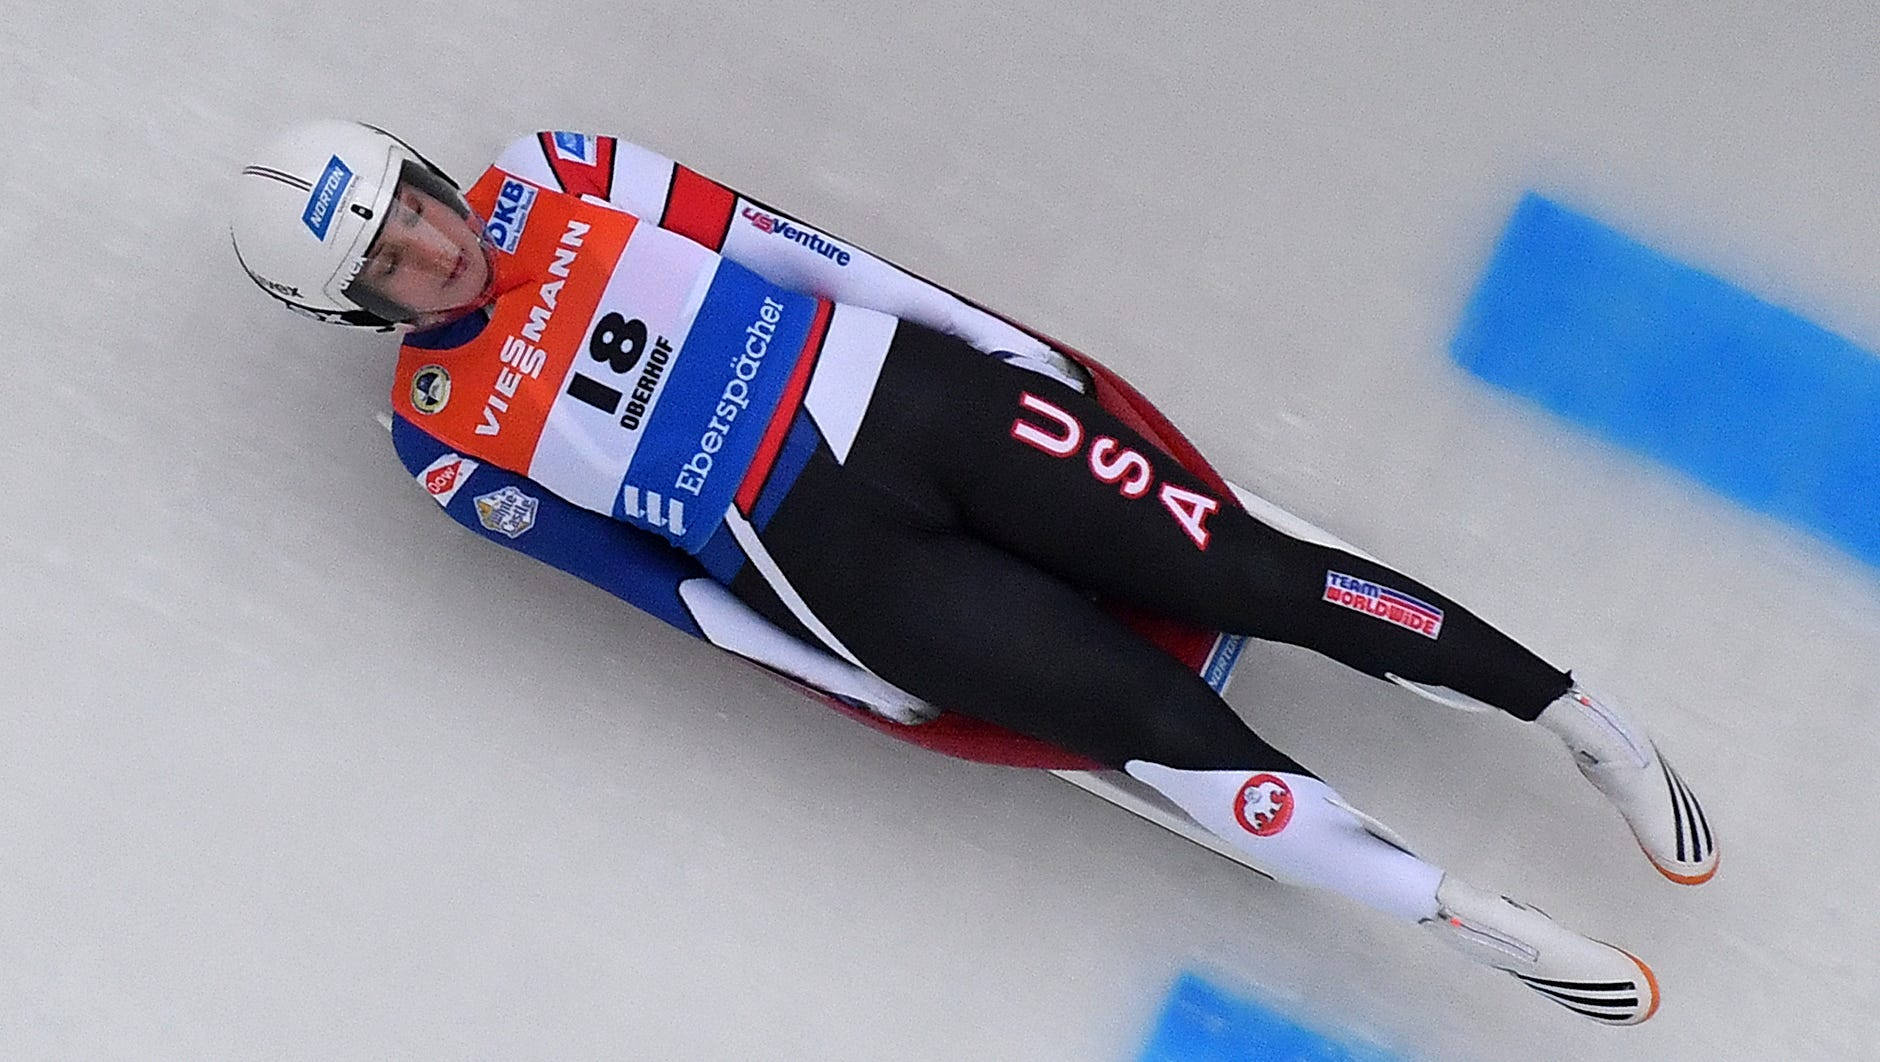 (if This Is Part Of A Sentence And Needs To Include Something About Computer Or Mobile Wallpaper, It Would Be: Lugebronsmedaljören Erin Hamlin Som Dator- Eller Mobilbakgrund.) Wallpaper